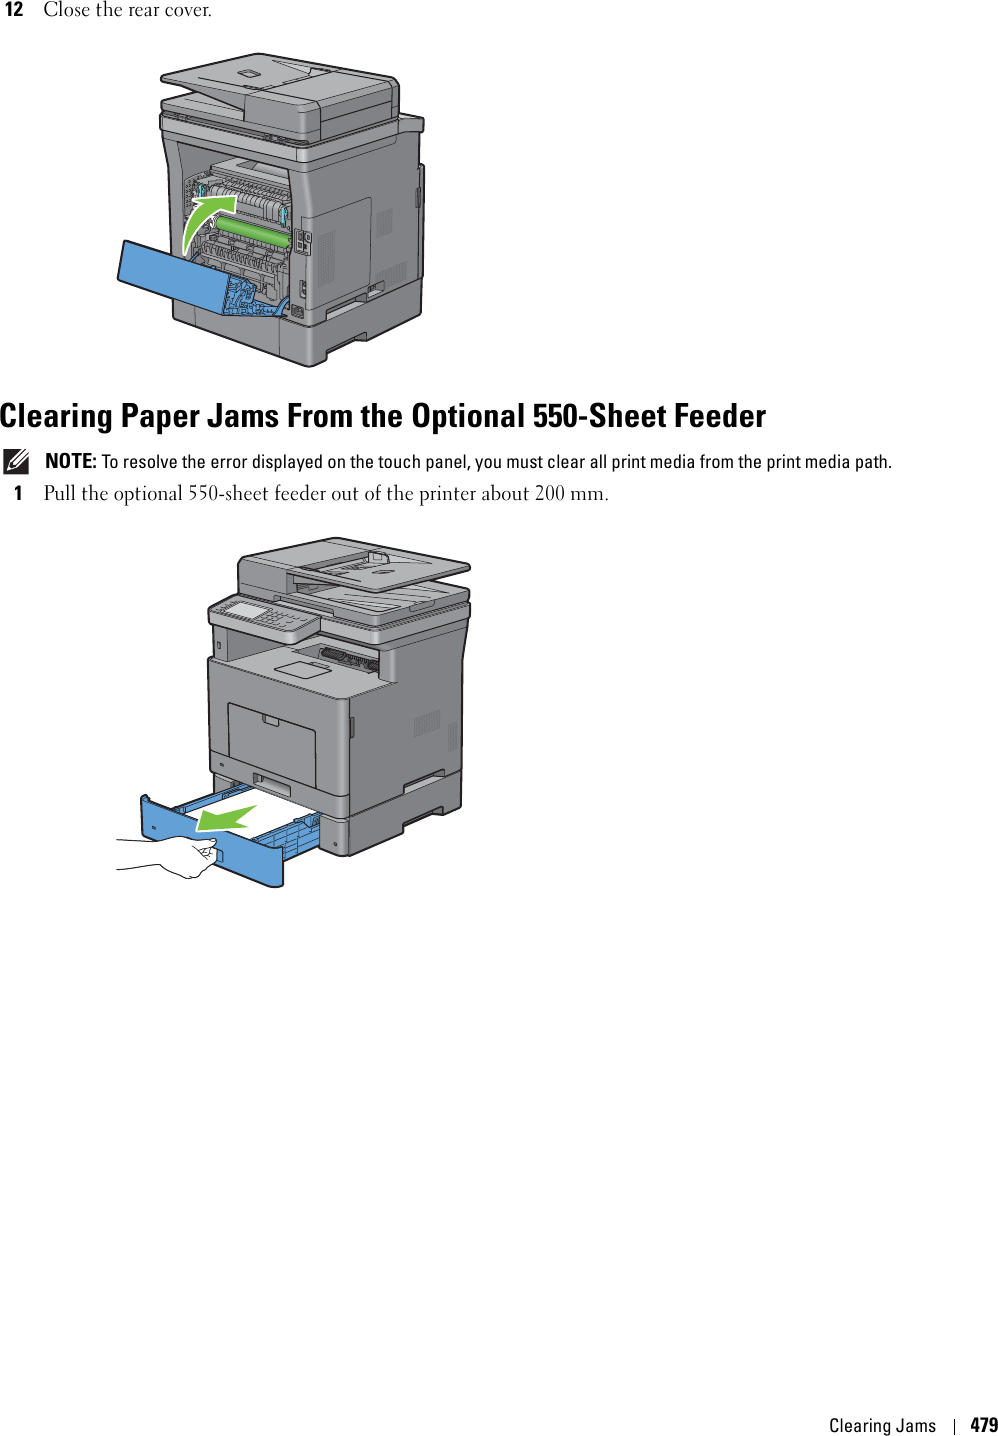 Clearing Jams47912Close the rear cover.Clearing Paper Jams From the Optional 550-Sheet Feeder NOTE: To resolve the error displayed on the touch panel, you must clear all print media from the print media path.1Pull the optional 550-sheet feeder out of the printer about 200 mm. 